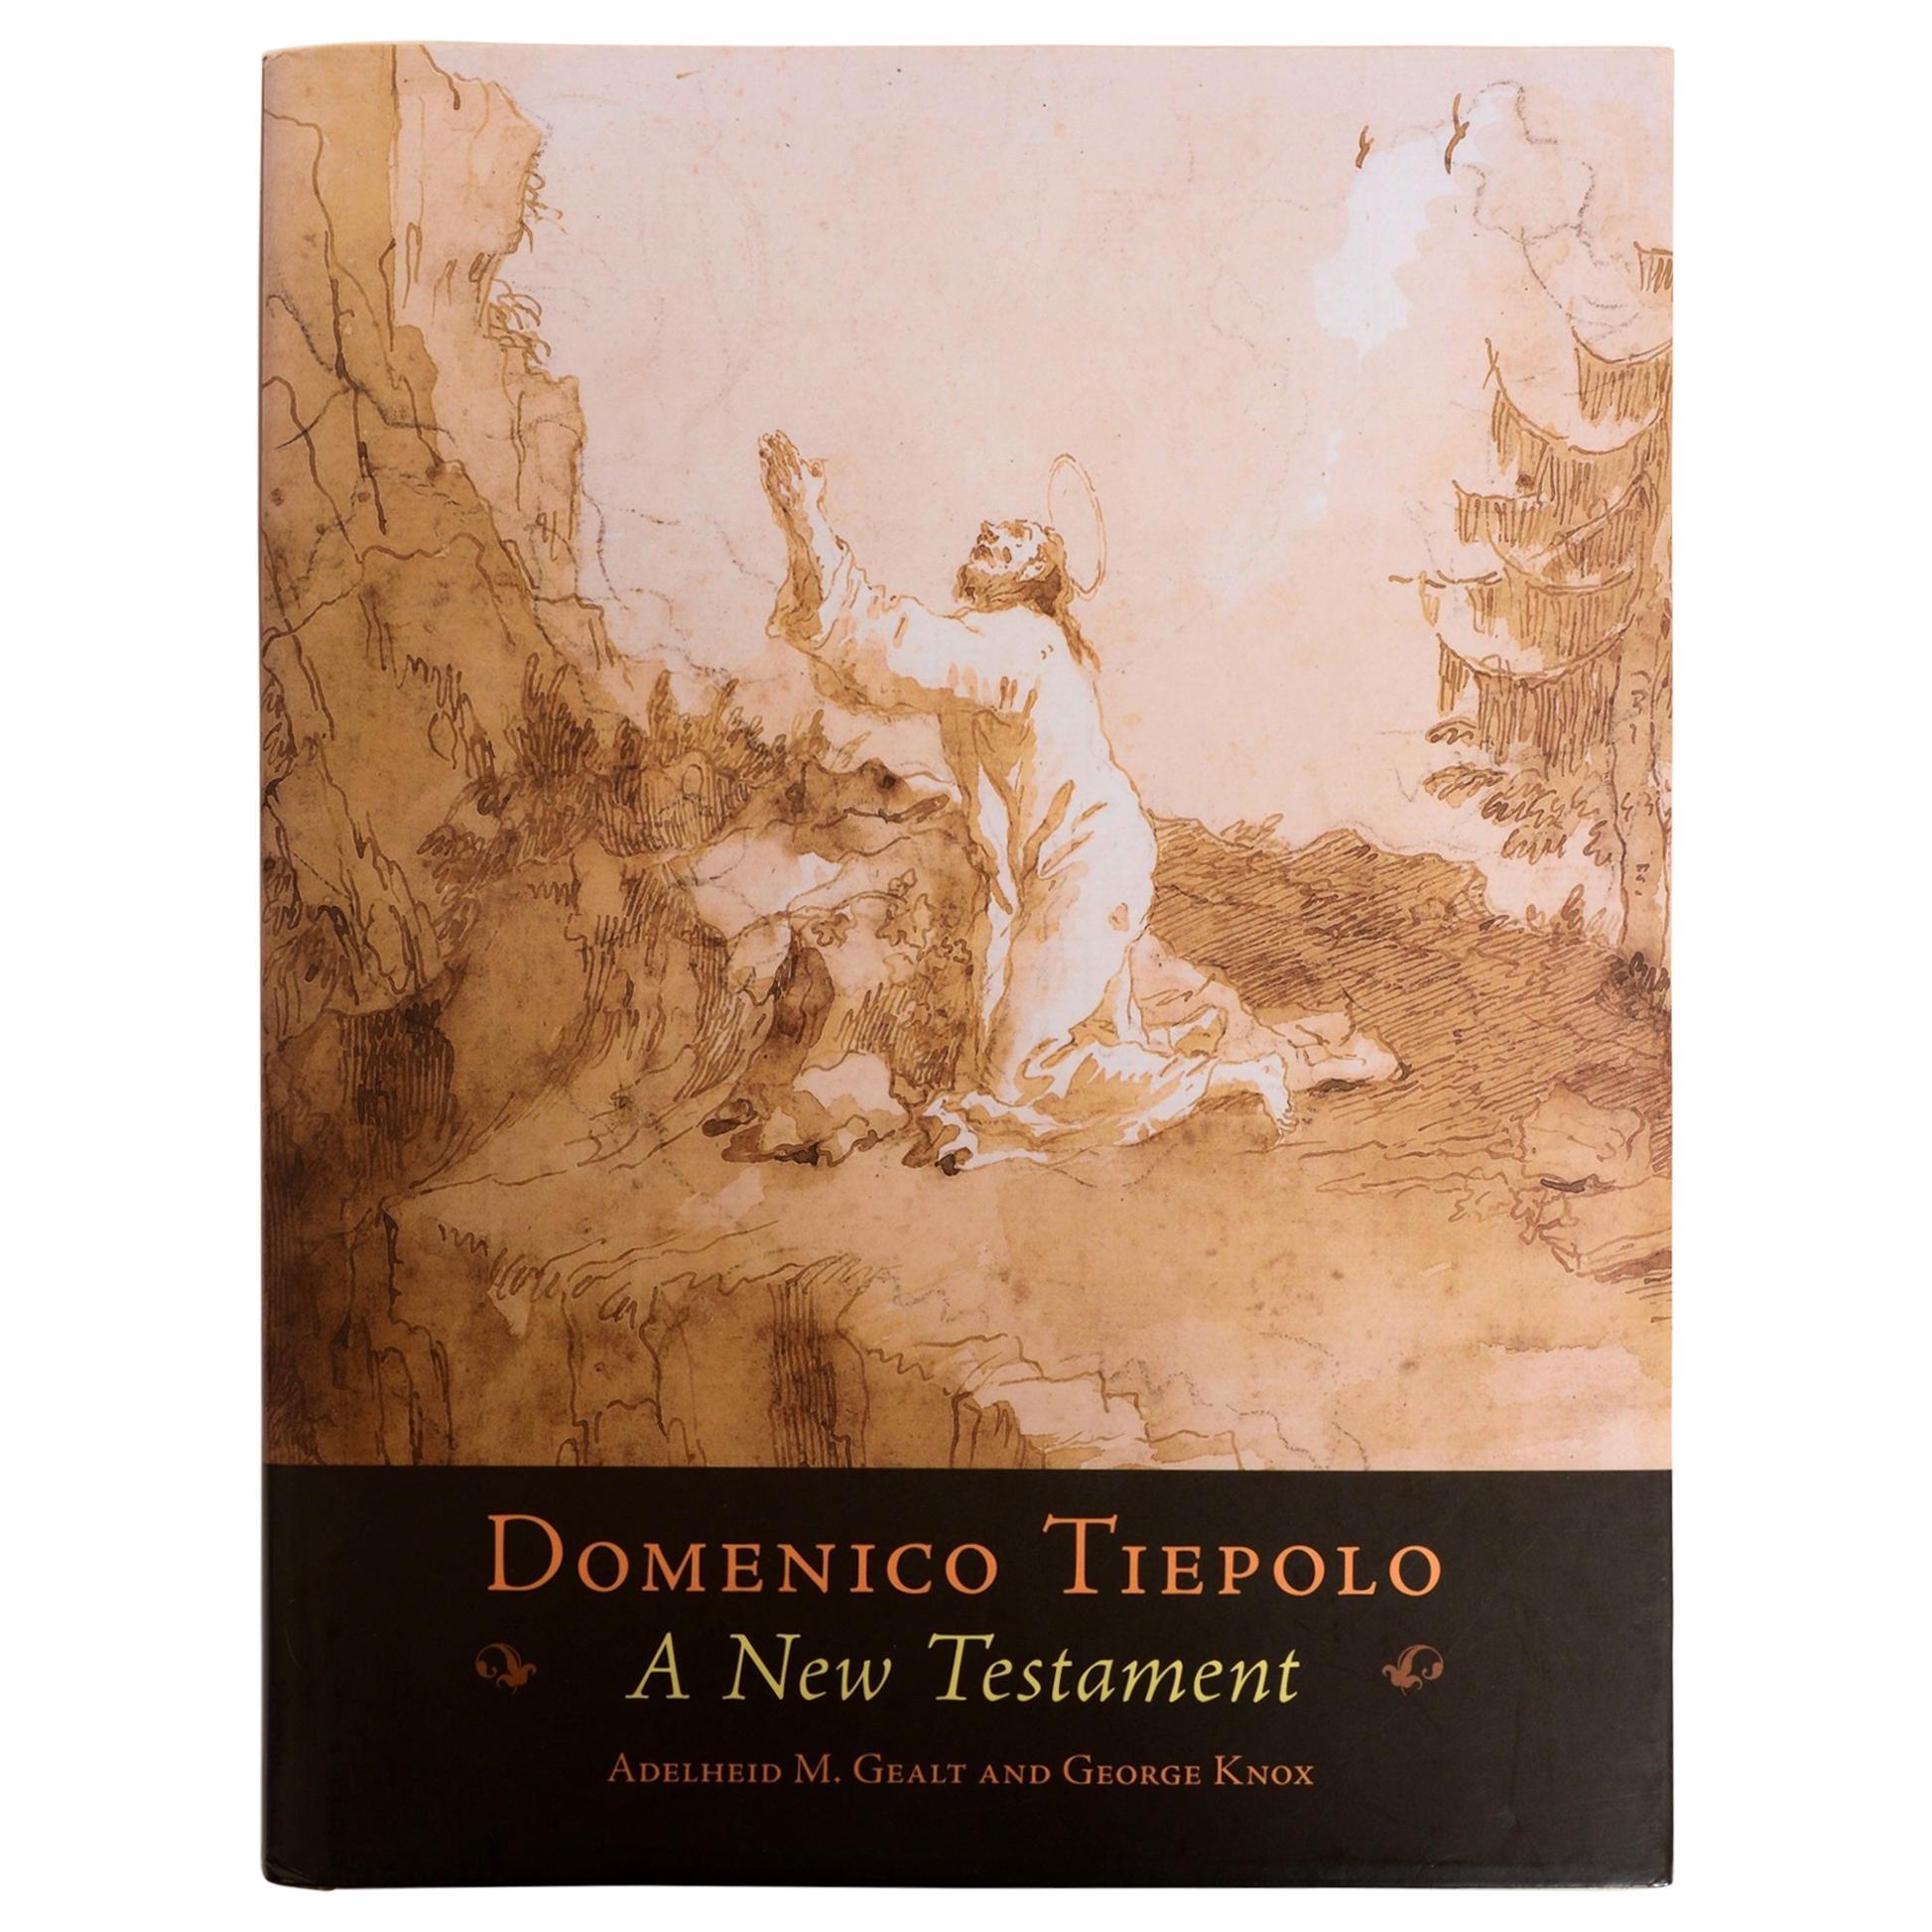 Domenico Tiepolo A New Testament by Adelheid M Gealt and George Knox at  1stDibs